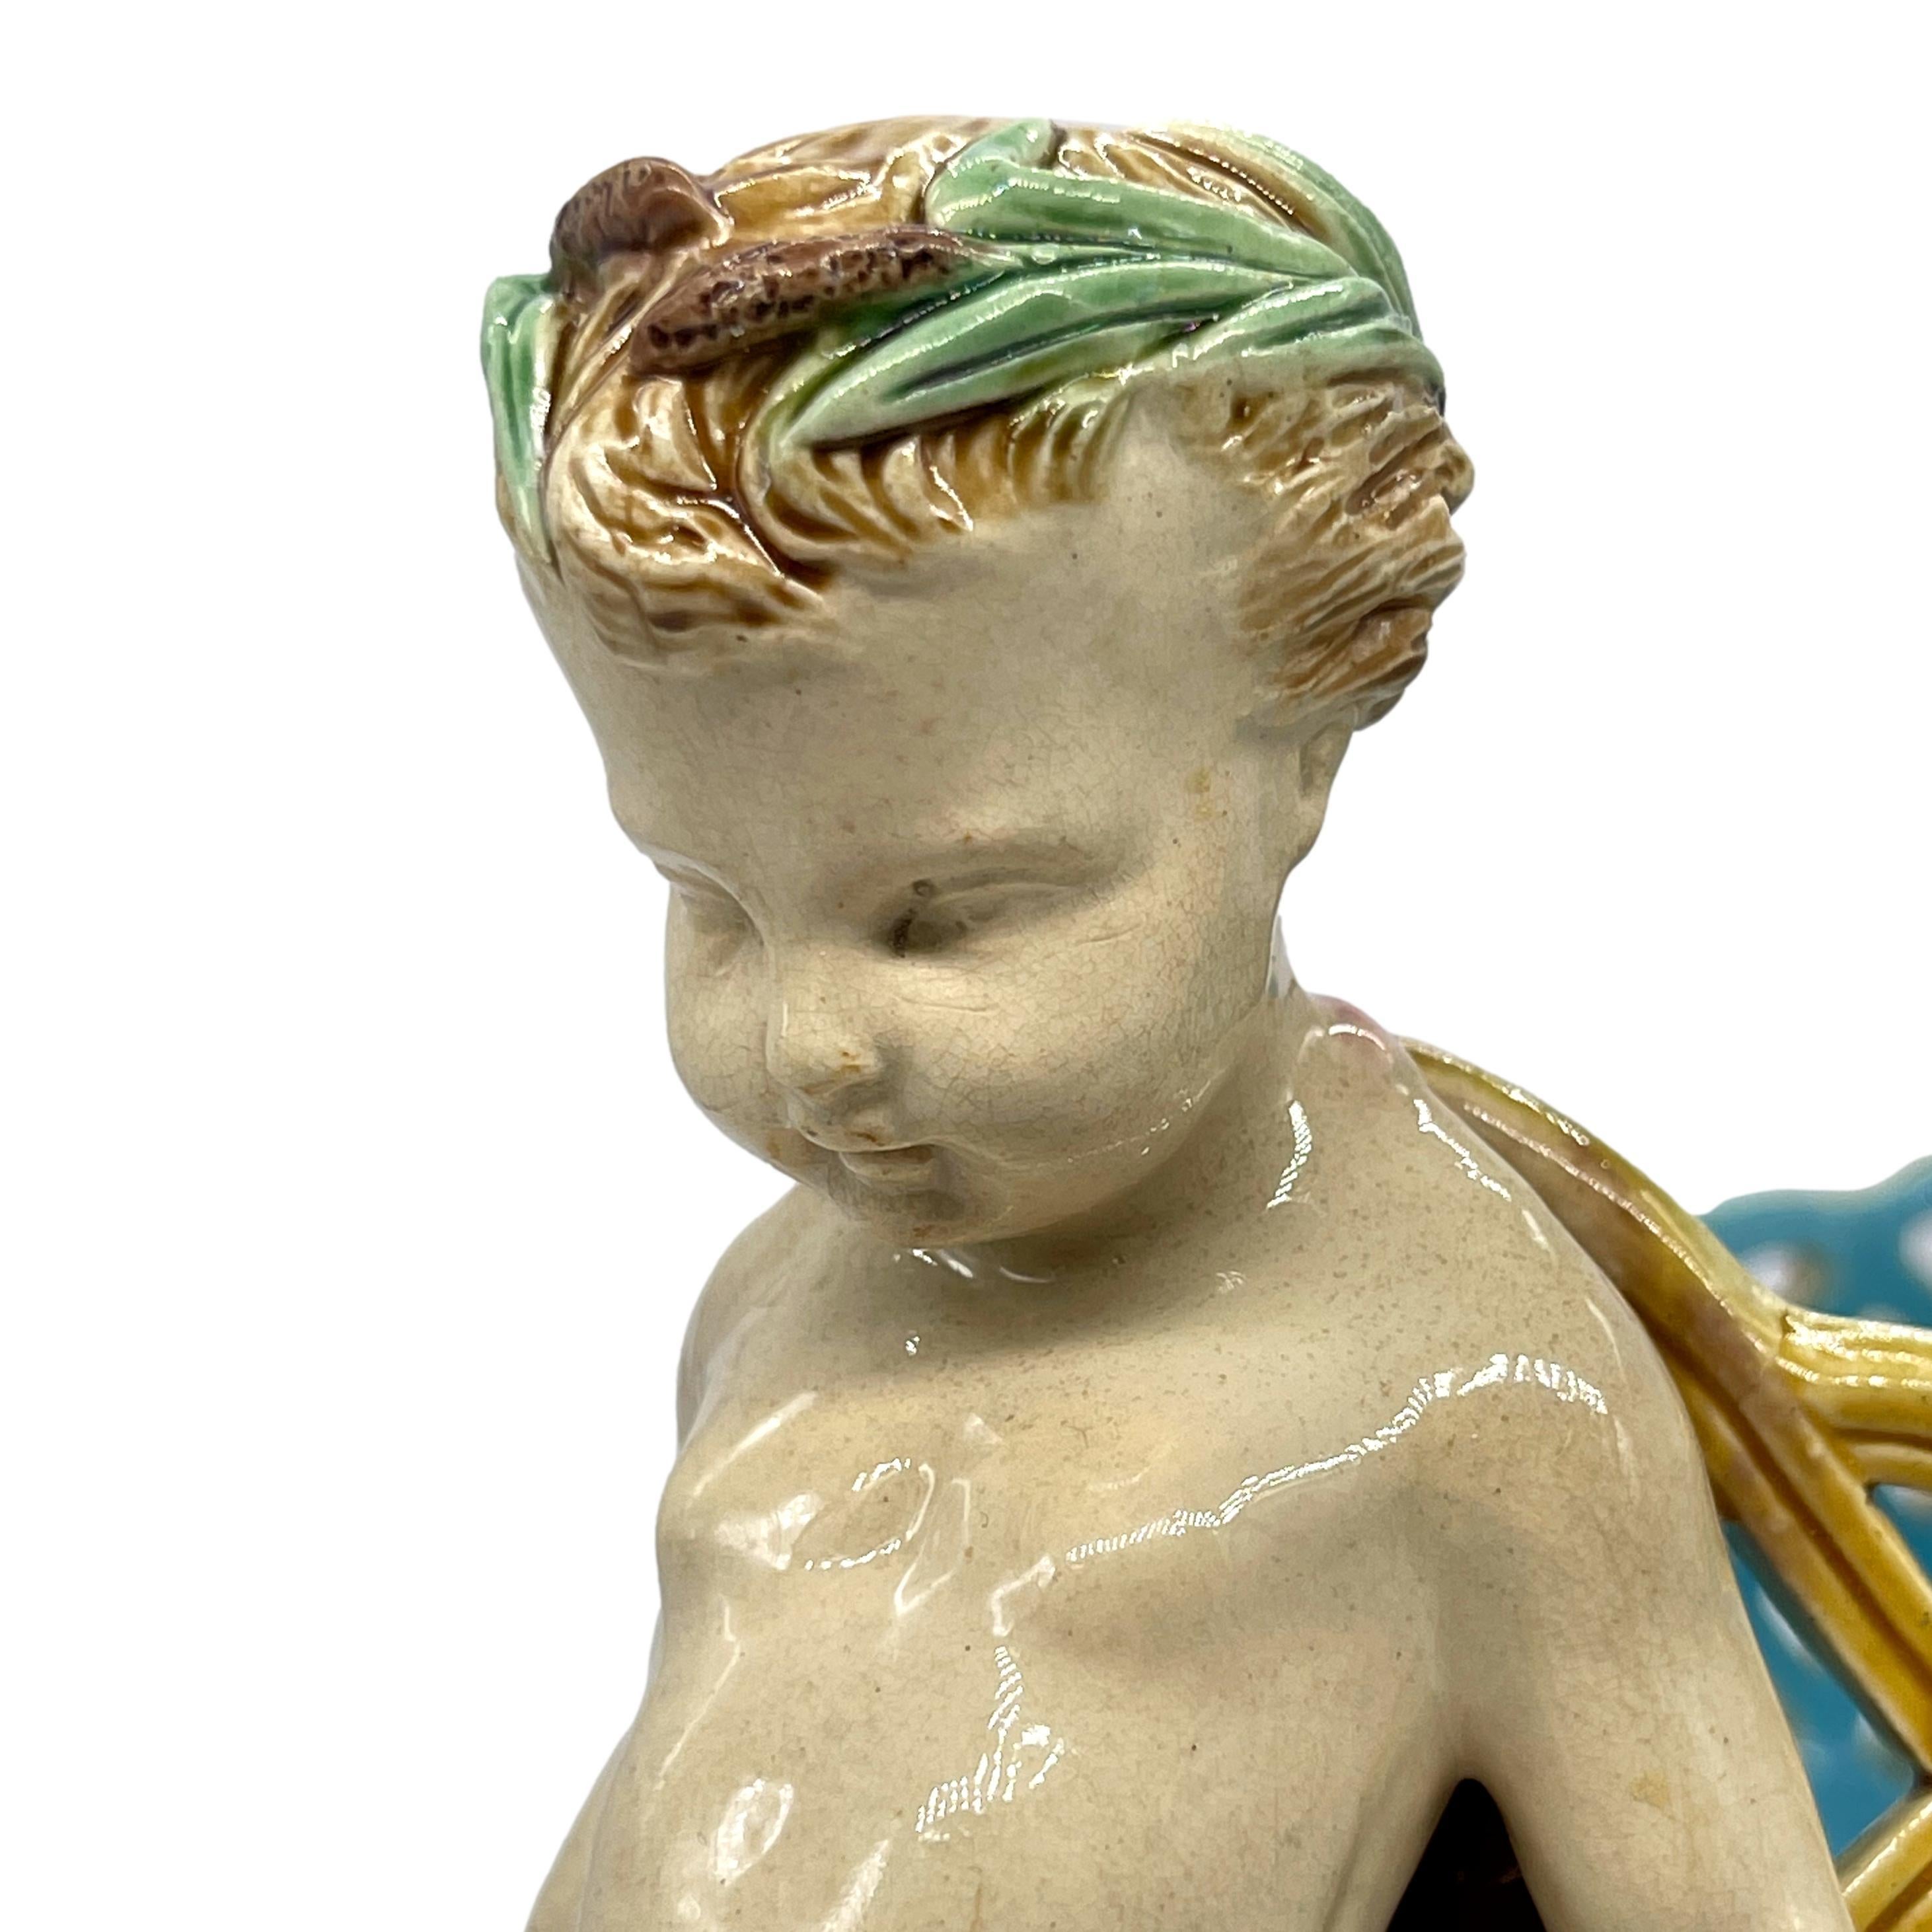 Molded Minton Majolica Faun Reticulated Basket by A. Carrier-Belleuse, Dated 1871